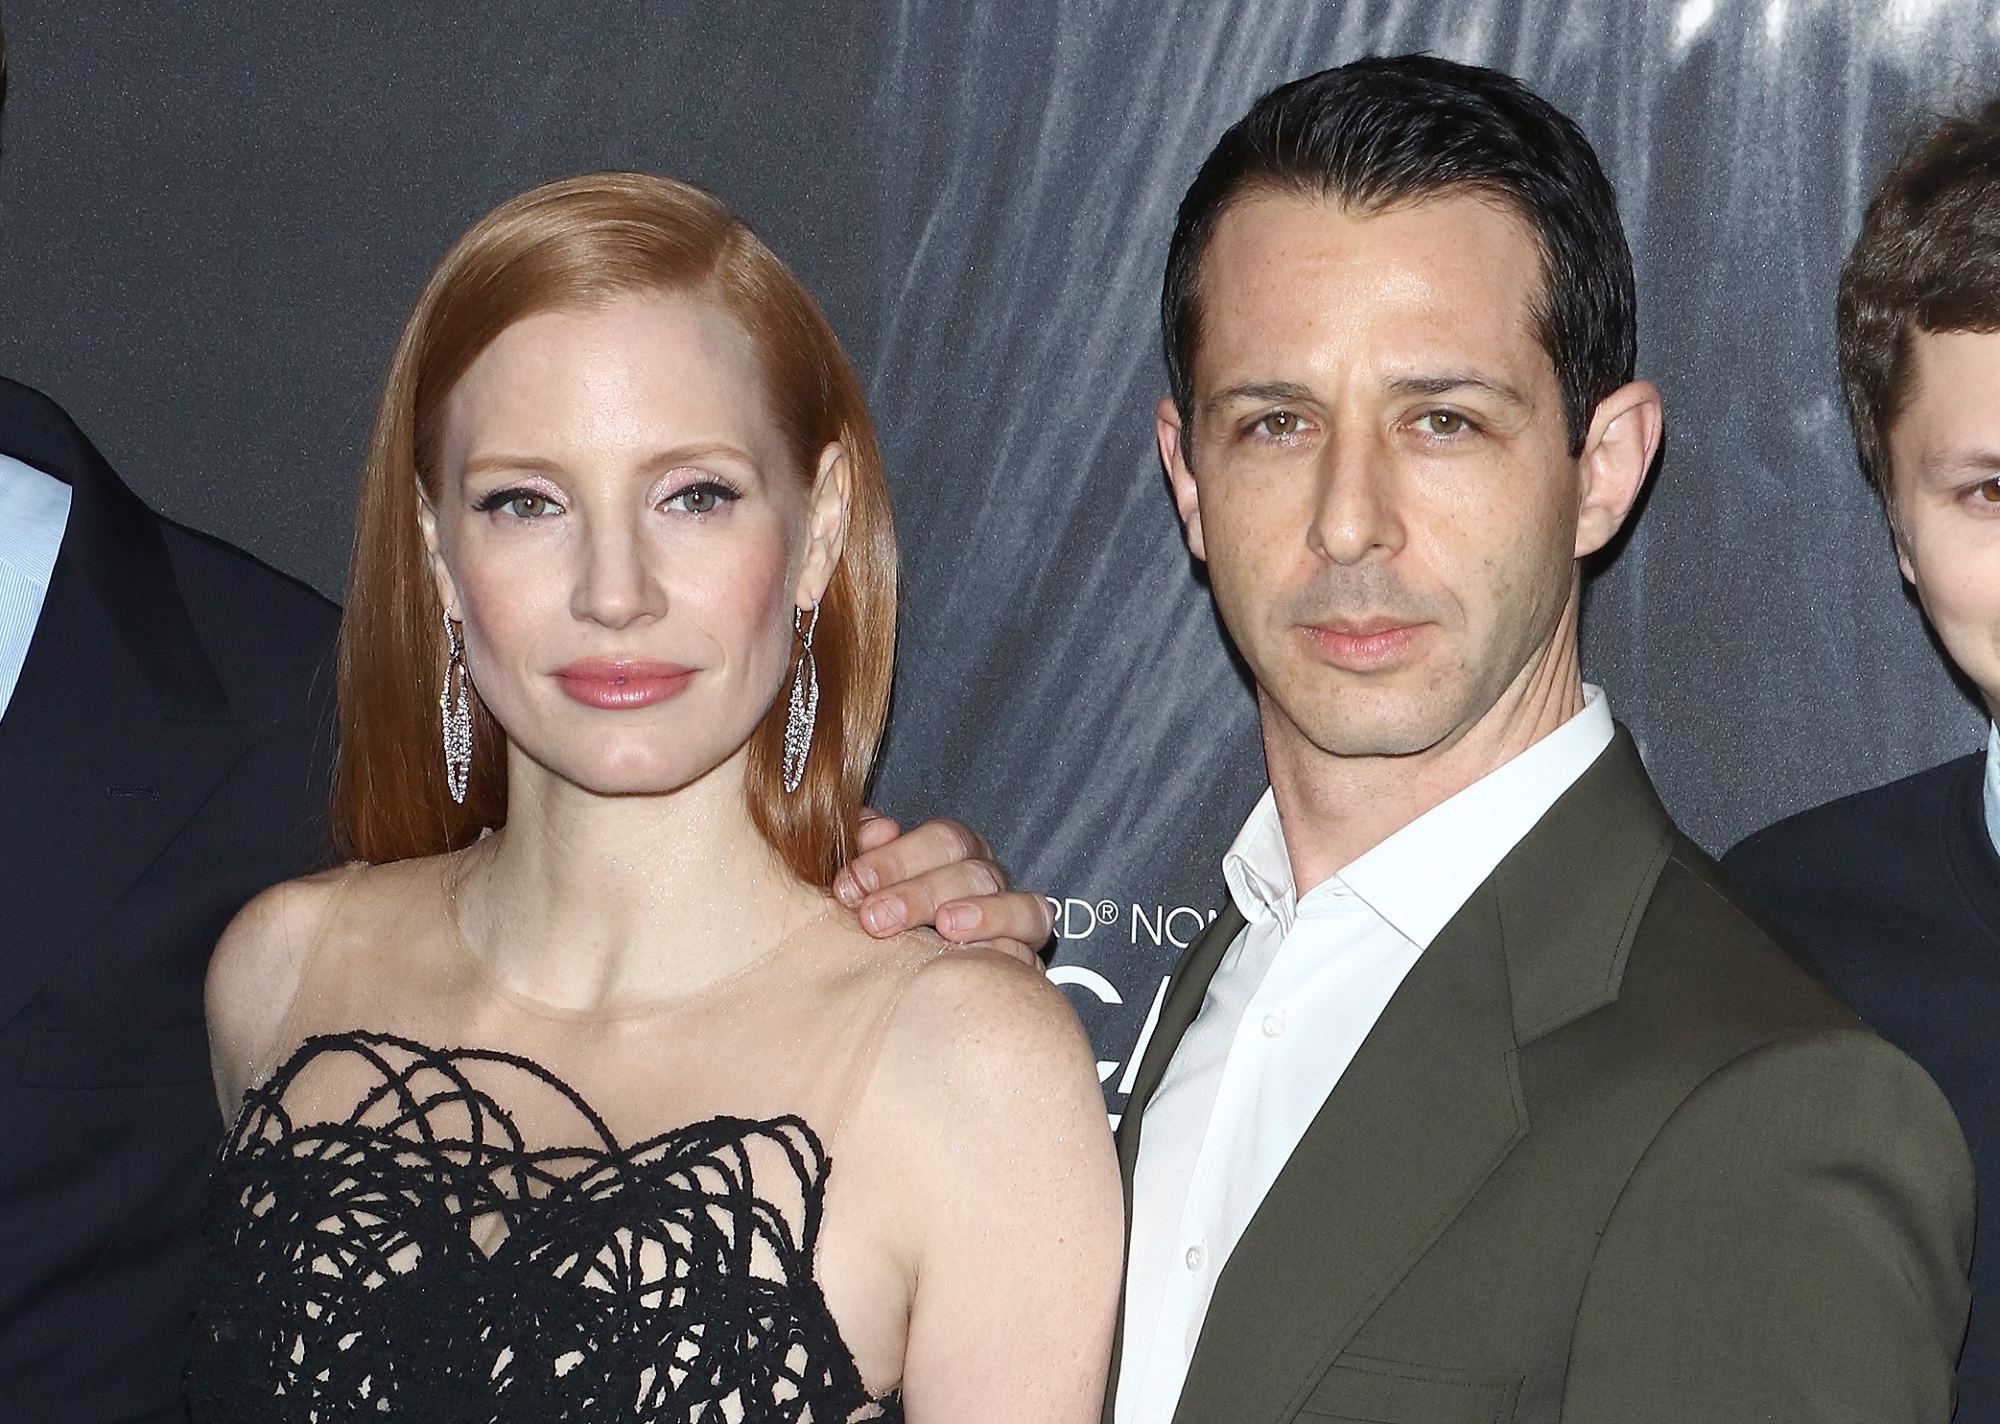 Actors Jessica Chastain (L) and Jeremy Strong attend the 'Molly's Game' New York premiere on December 13, 2017, in New York City.